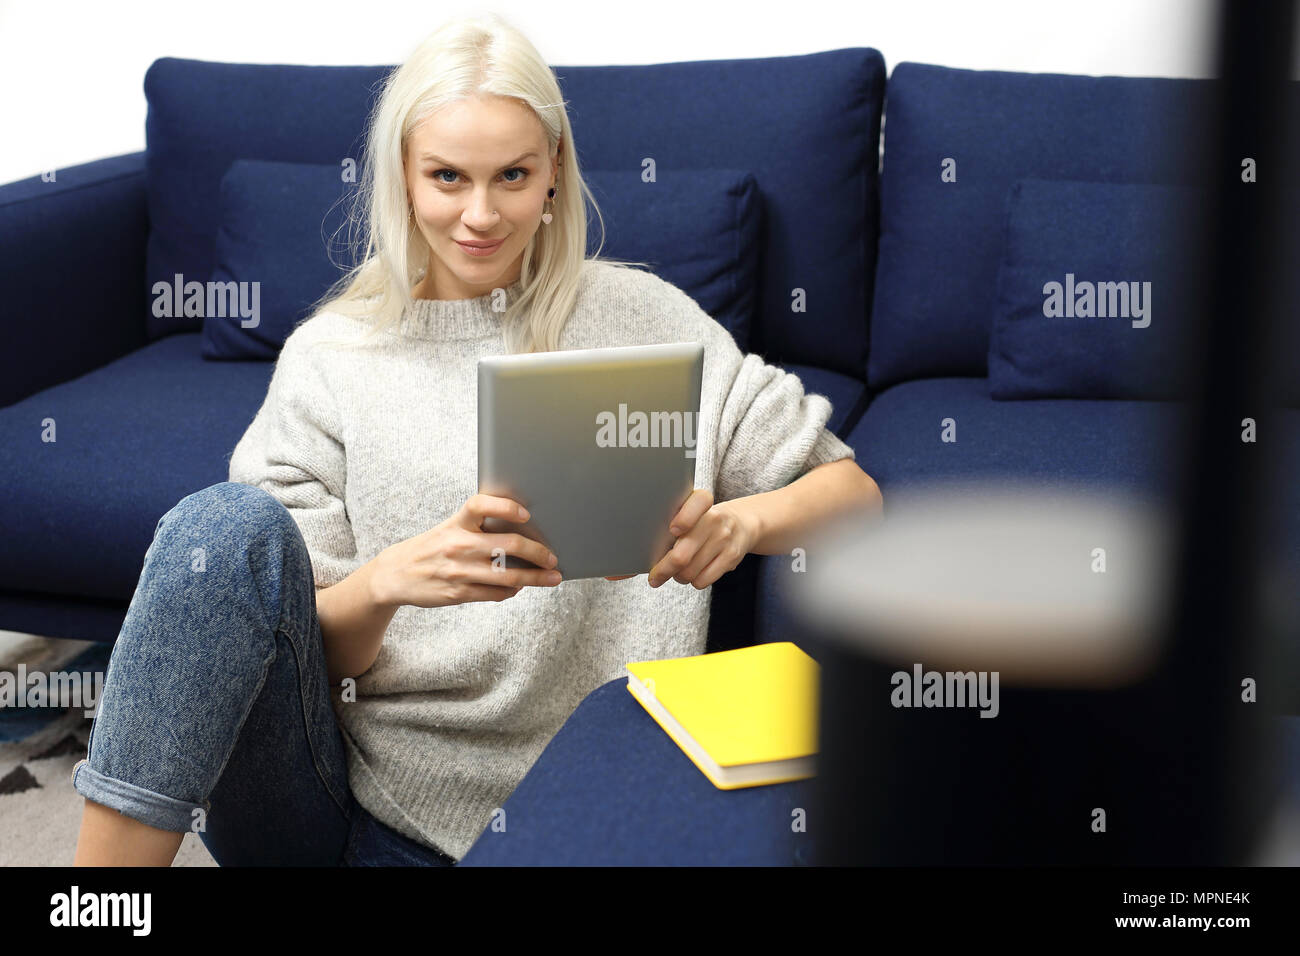 Reading an e-book on a digital tablet. Beautiful student reads the ebook on the tablet while sitting on the carpet. Stock Photo